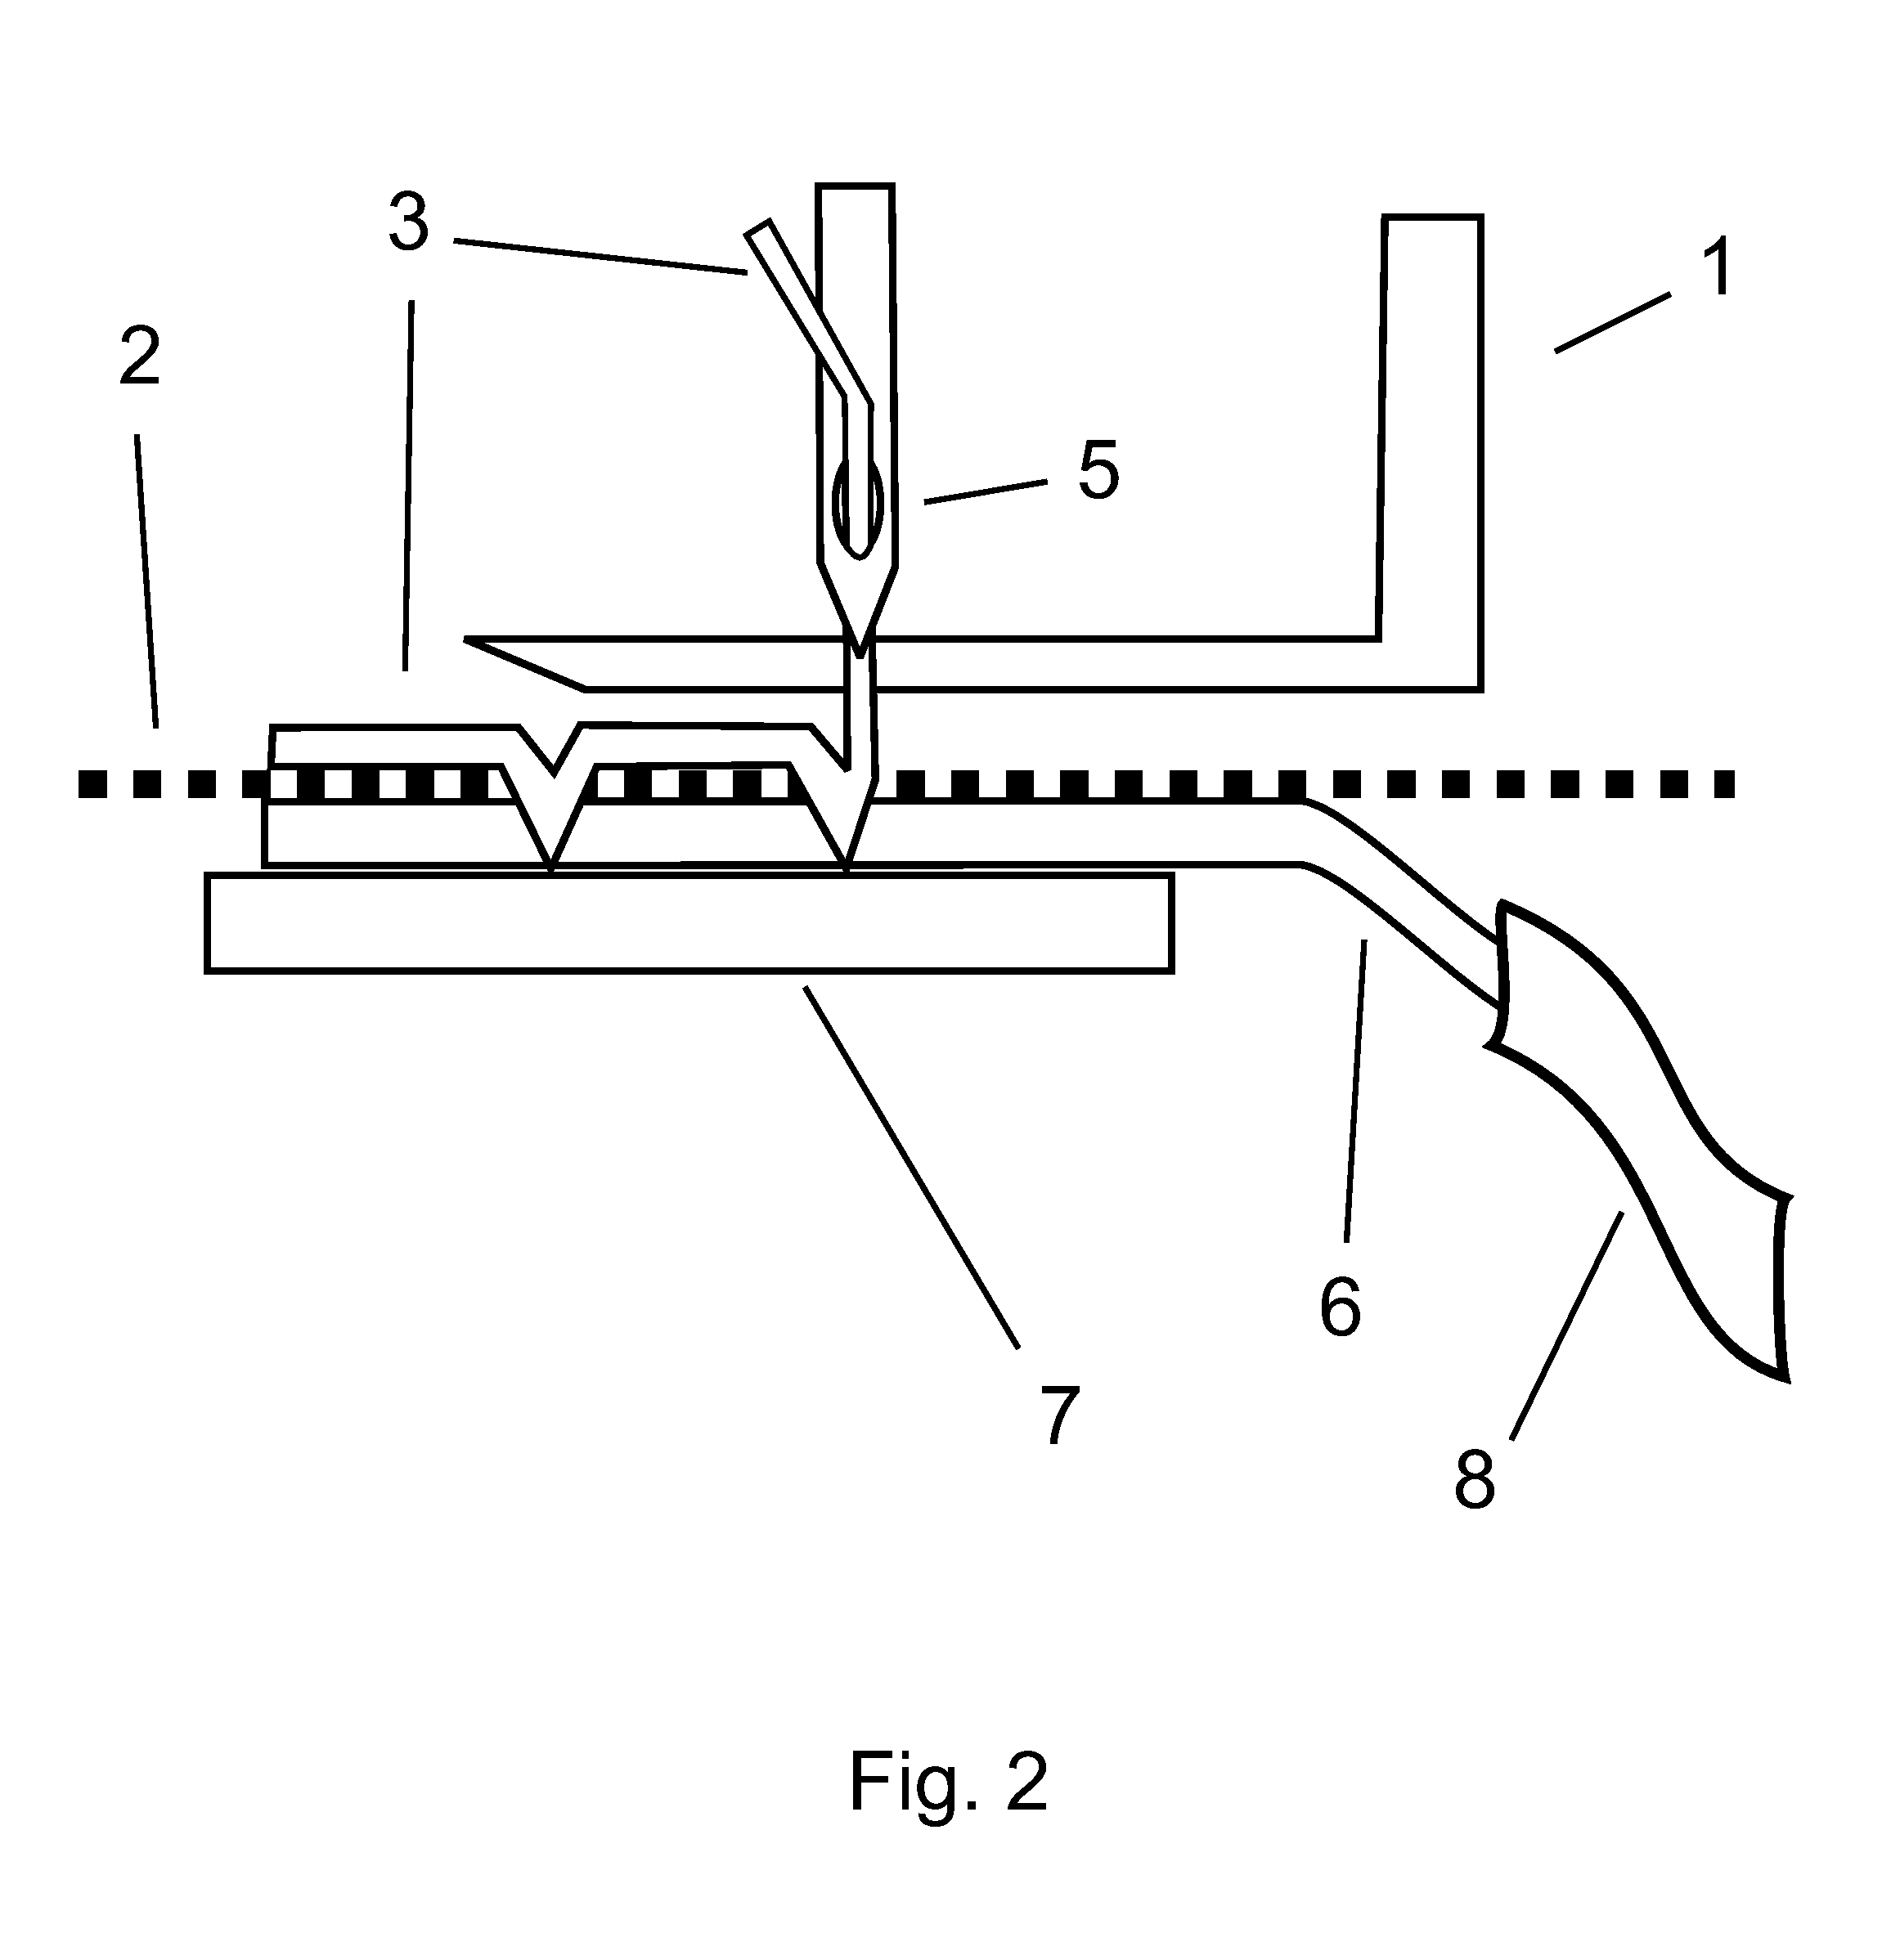 Stitching apparatus and method of use